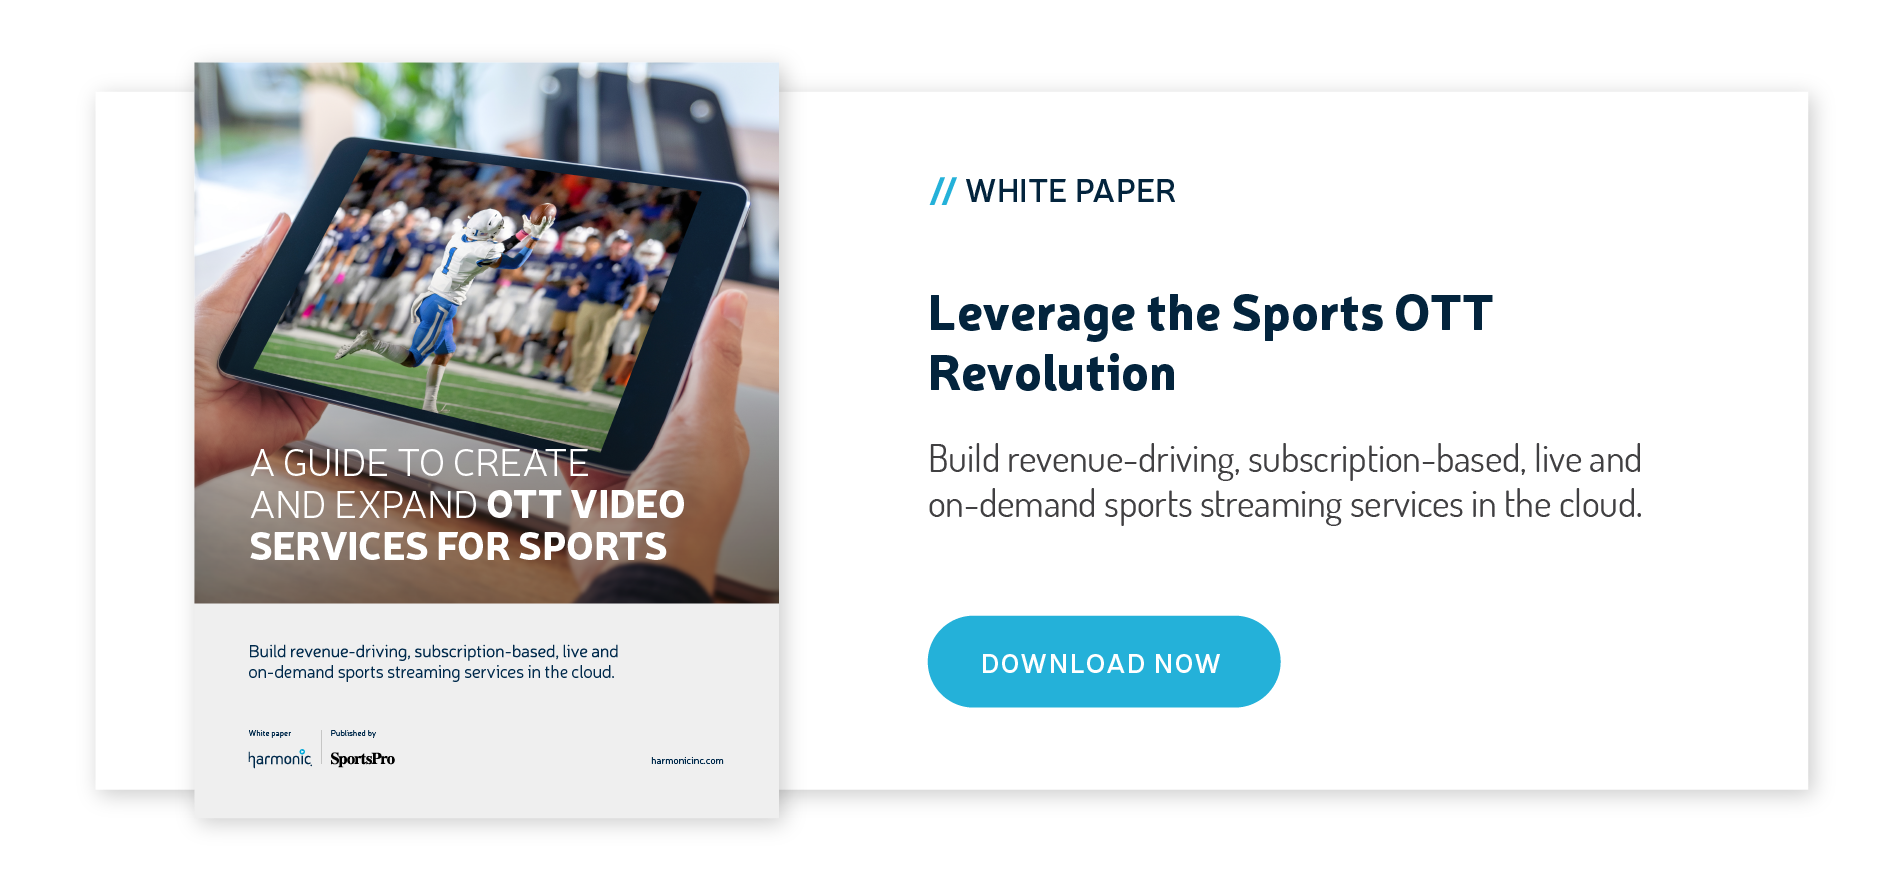 A GUIDE TO CREATE AND EXPAND OTT VIDEO SERVICES FOR SPORTS